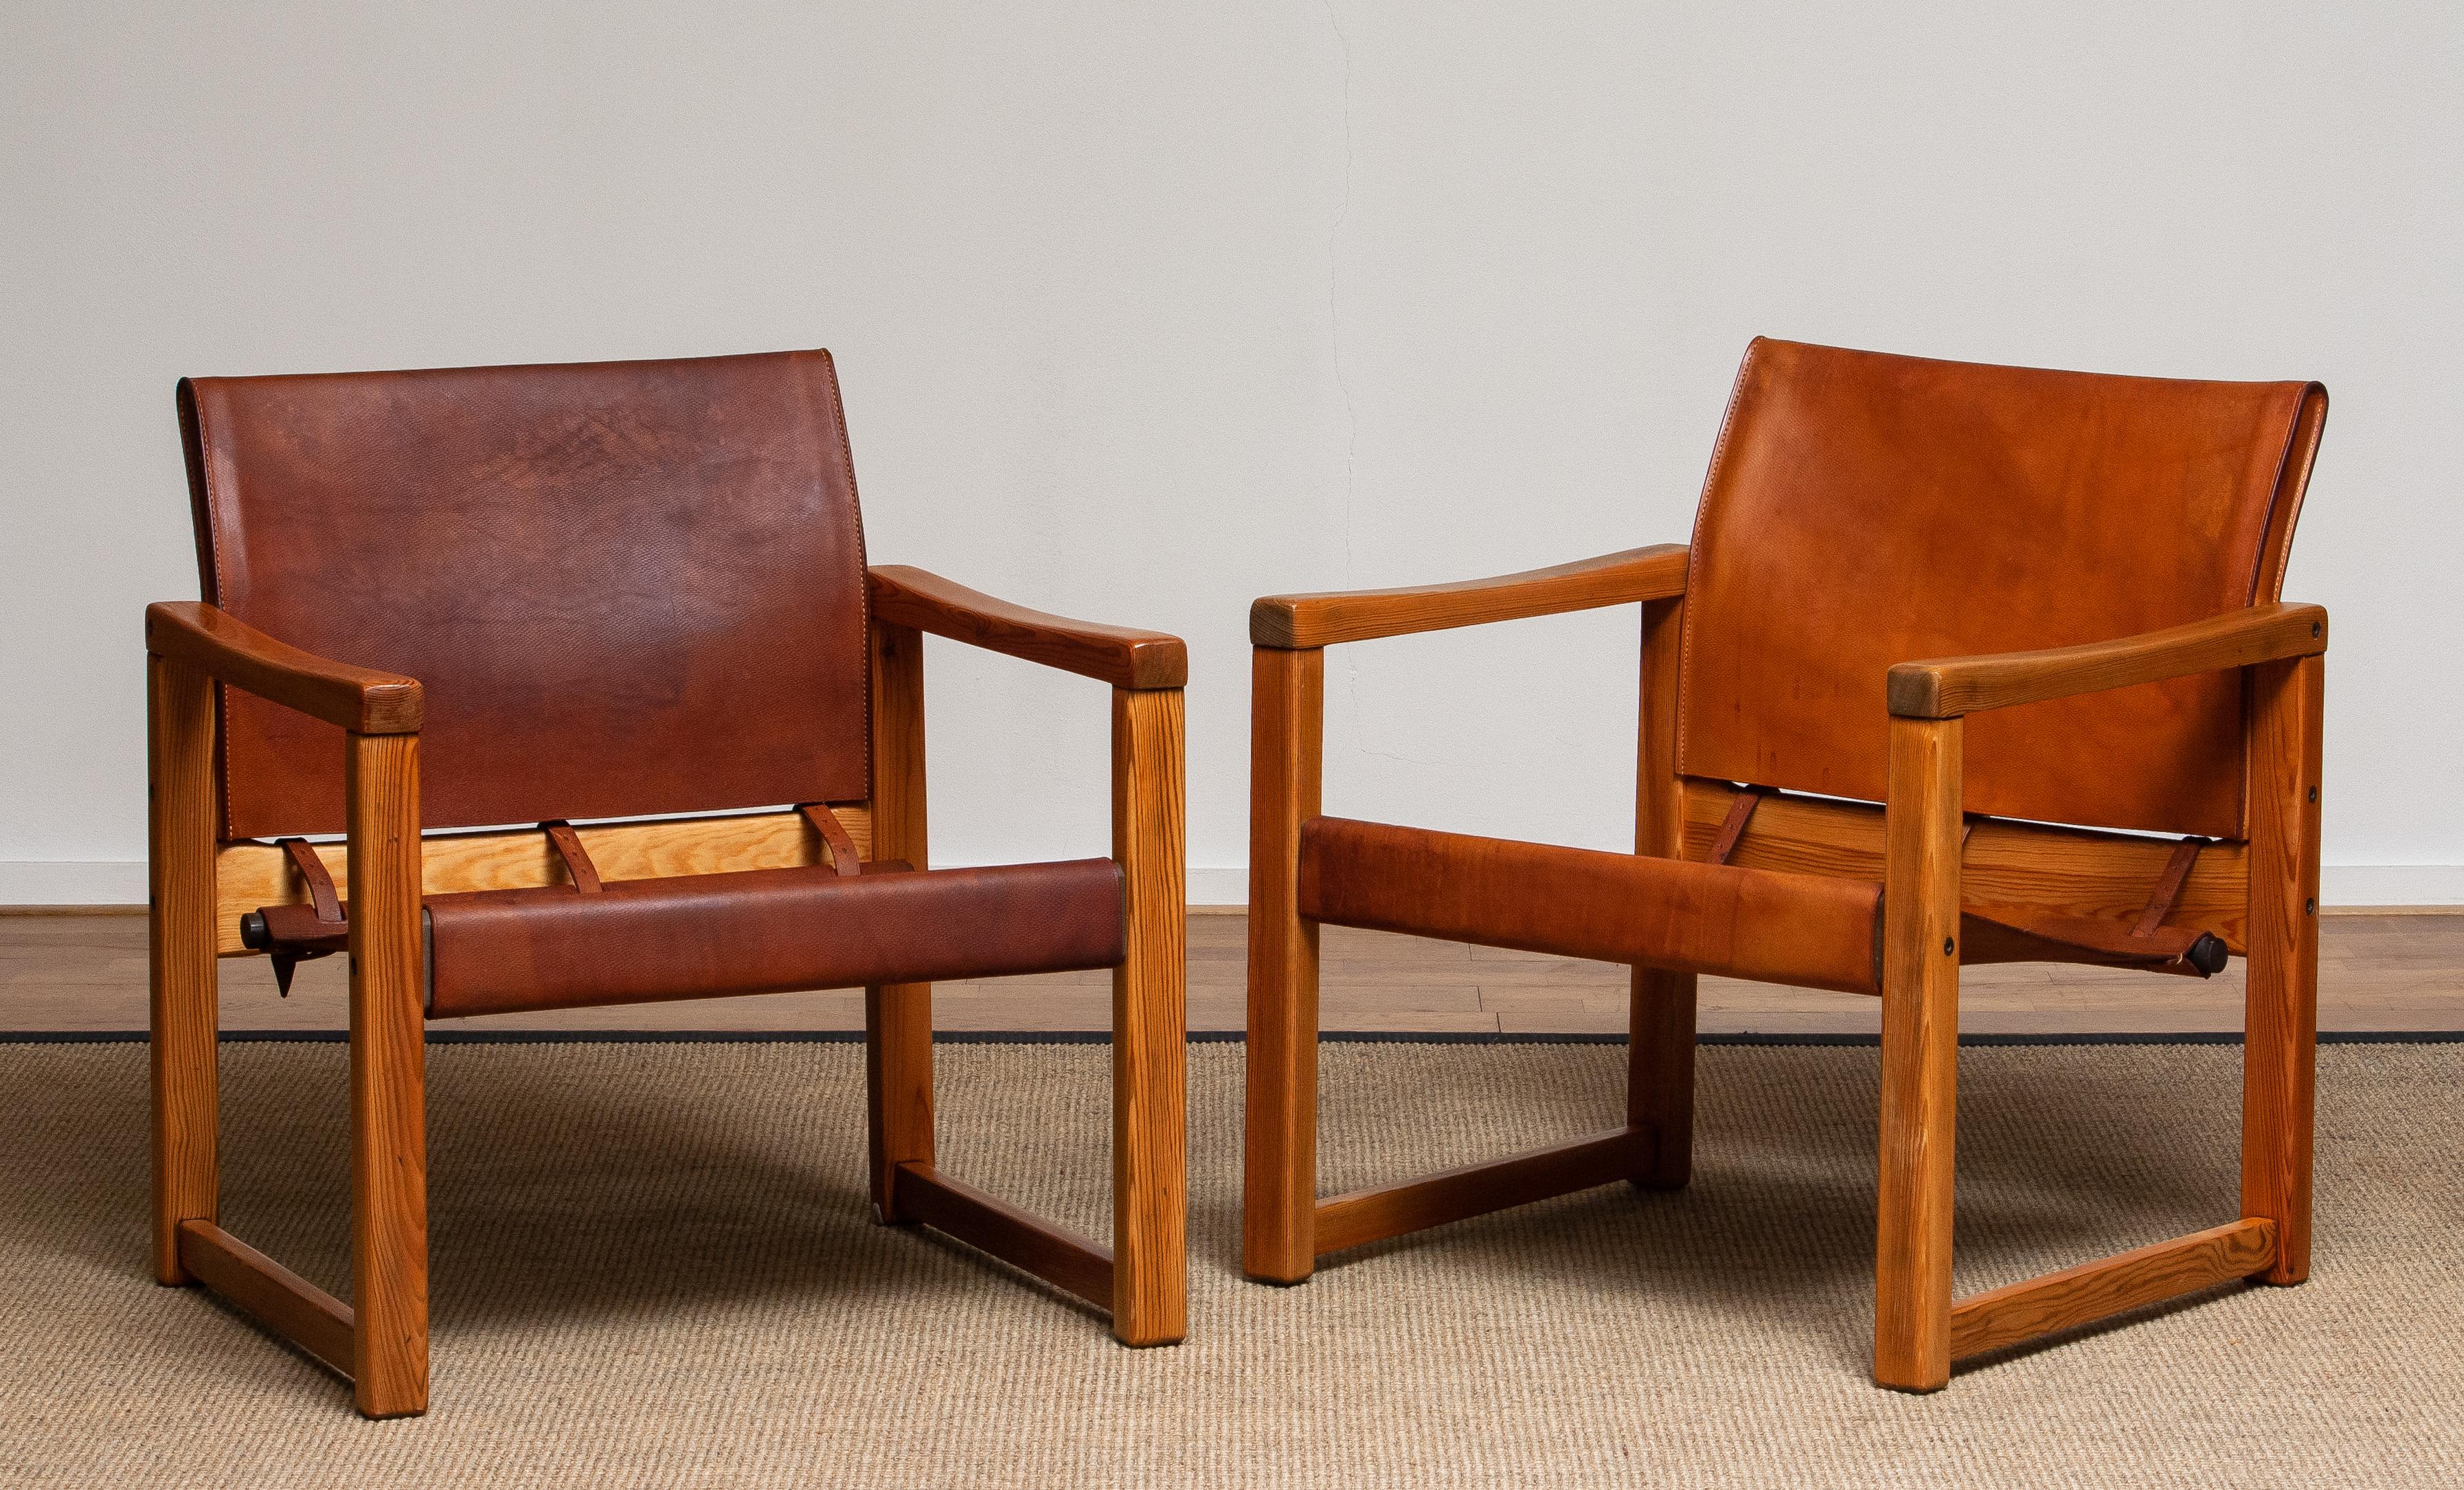 Beautiful set of two study cognac leather safari chairs (Model Diana) designed by Karin Mobring for Ikea Sweden. The model is lounged in 1974.
The leather on both chairs is in good and smooth condition and also has a beautiful patina true the